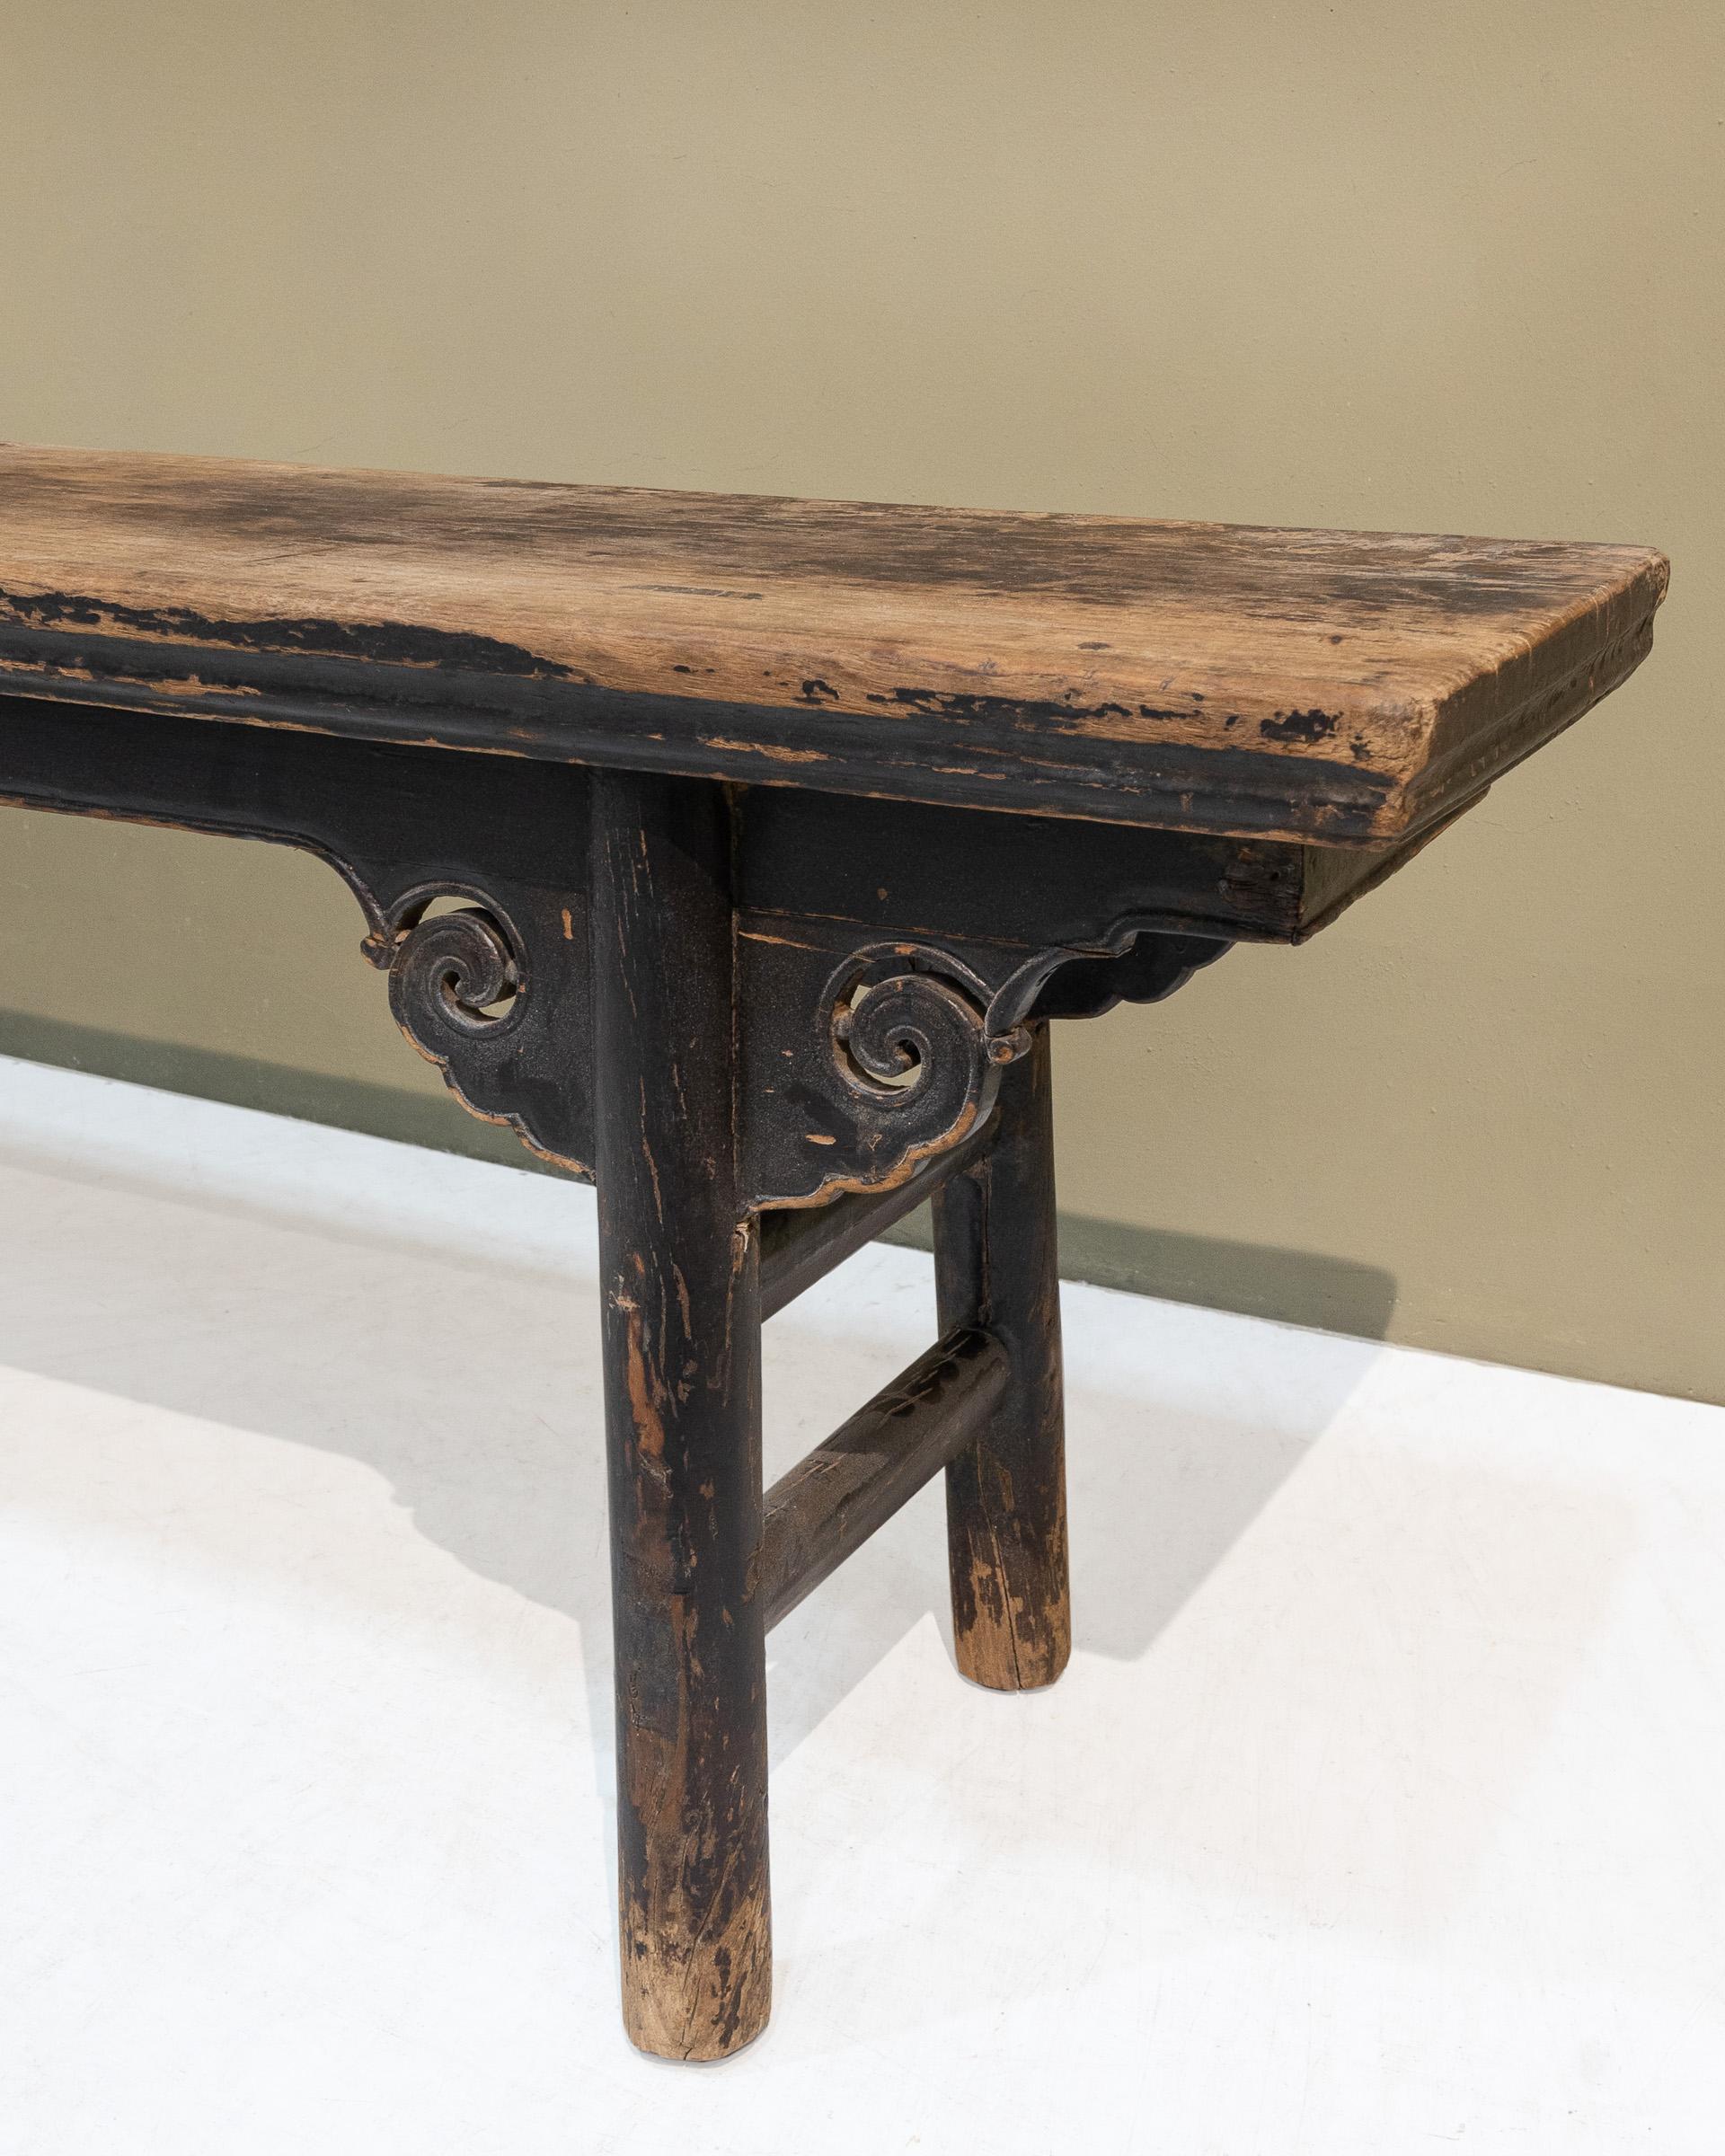 A recessed leg long bench with carved cloud spandrels, from Shanxi province. Its round legs are slightly tapered and they have a diameter of approx. 5.4cm. There are double stretchers on the sides and the seat top is made of a single plank of solid